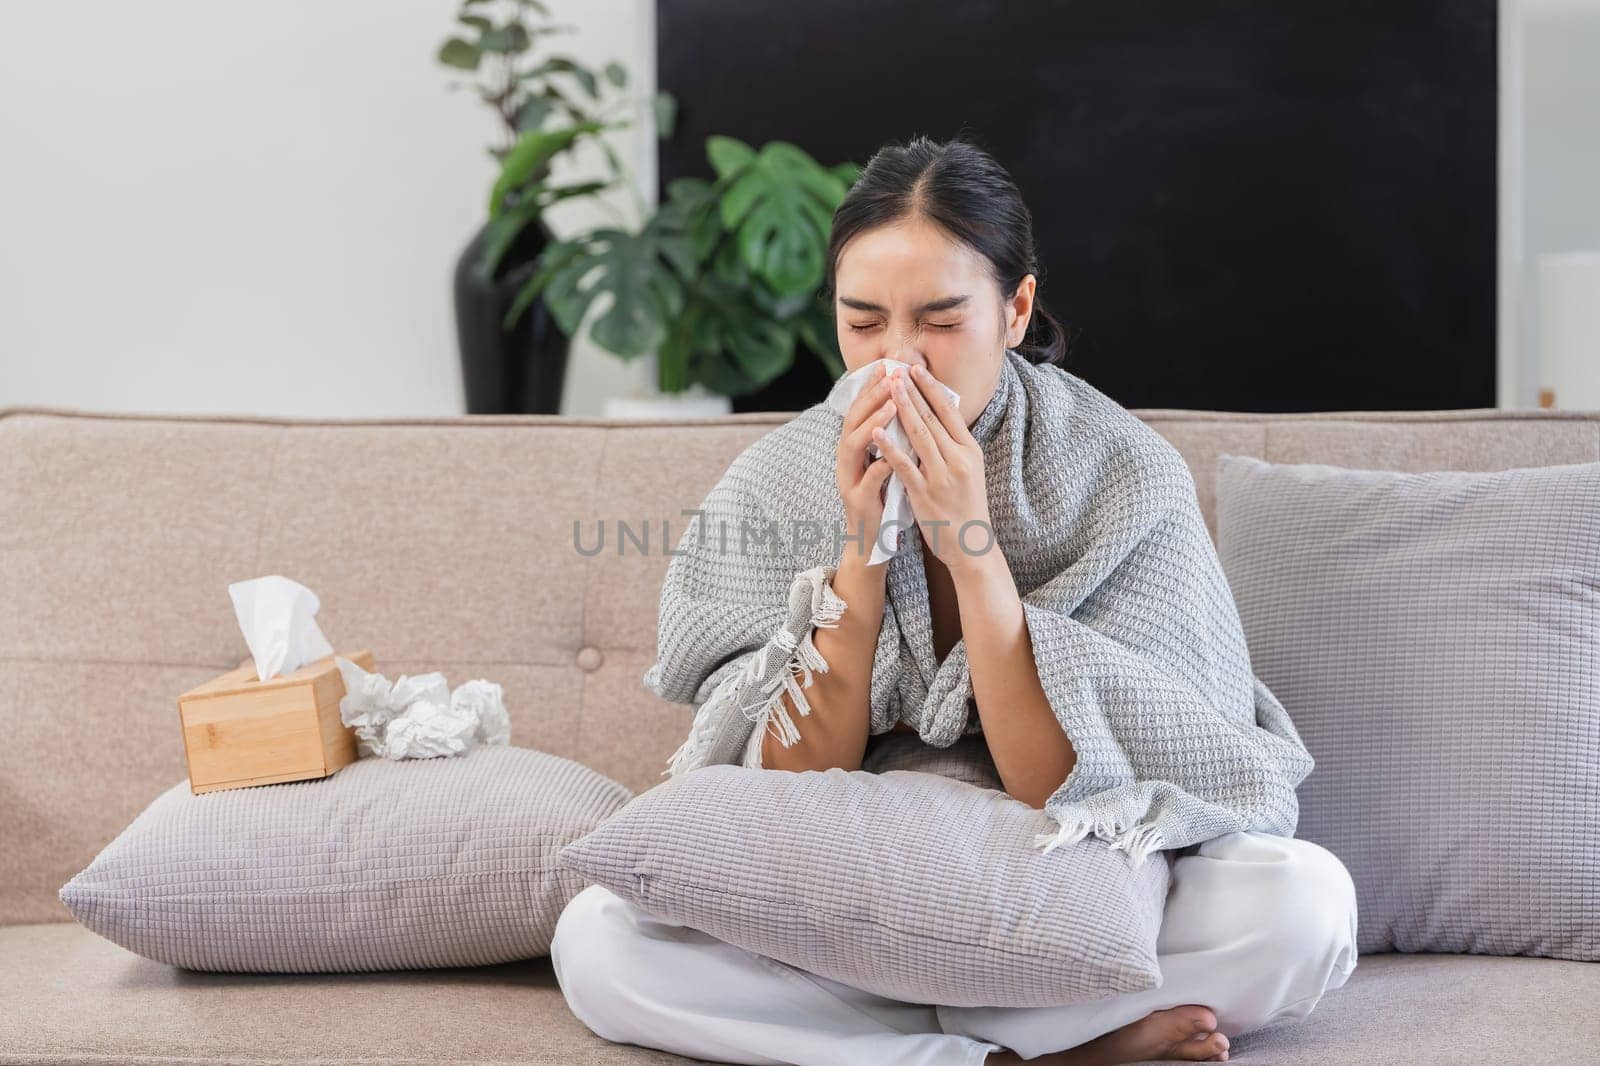 A woman with a fever sits on a sofa, wrapped in a blanket, holding a tissue, and looking unwell in a modern living room setting.